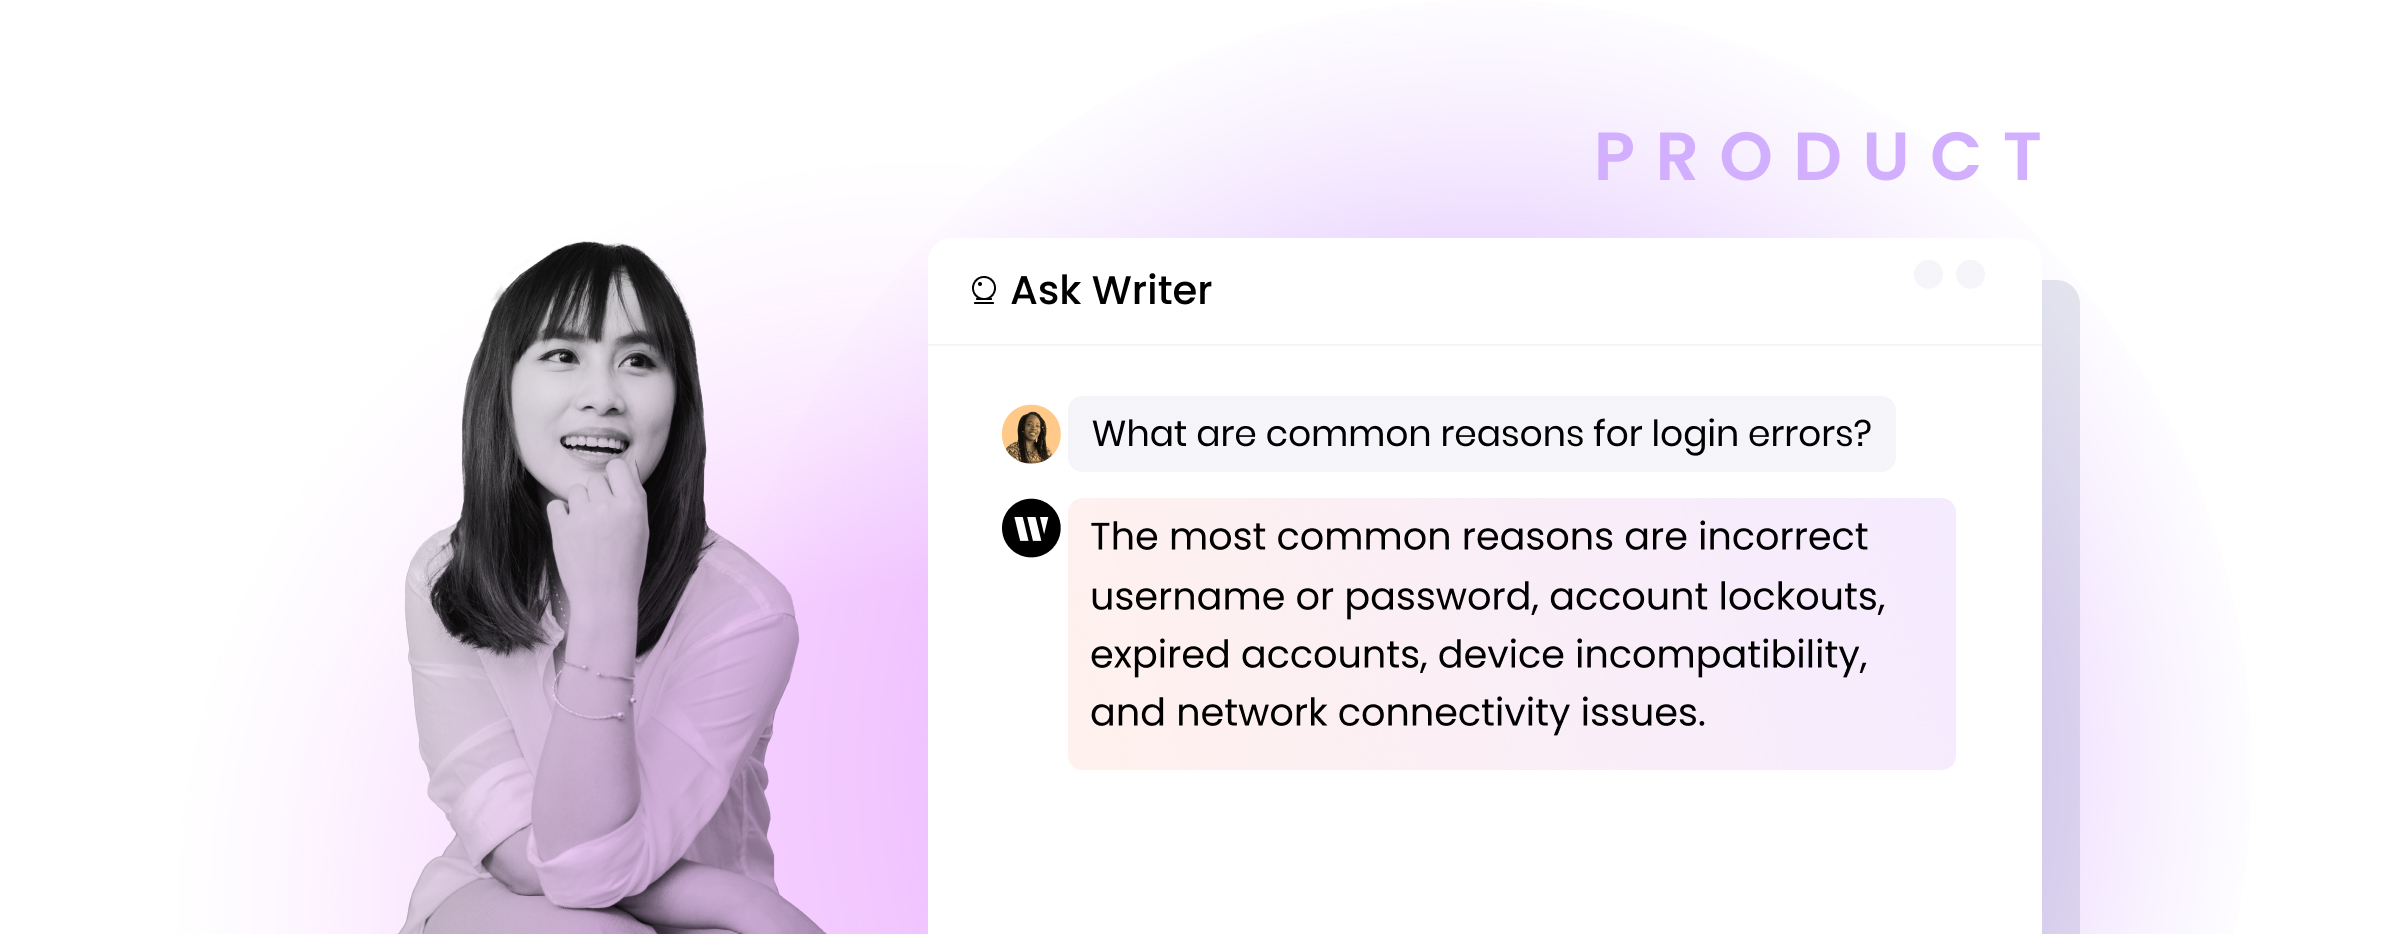 Product person using Ask Writer. Question: What are common reasons for login errors? Response: The most common reasons are incorrect username or password, account lockouts, expired accounts, device incompatibility, and network connectivity issues.